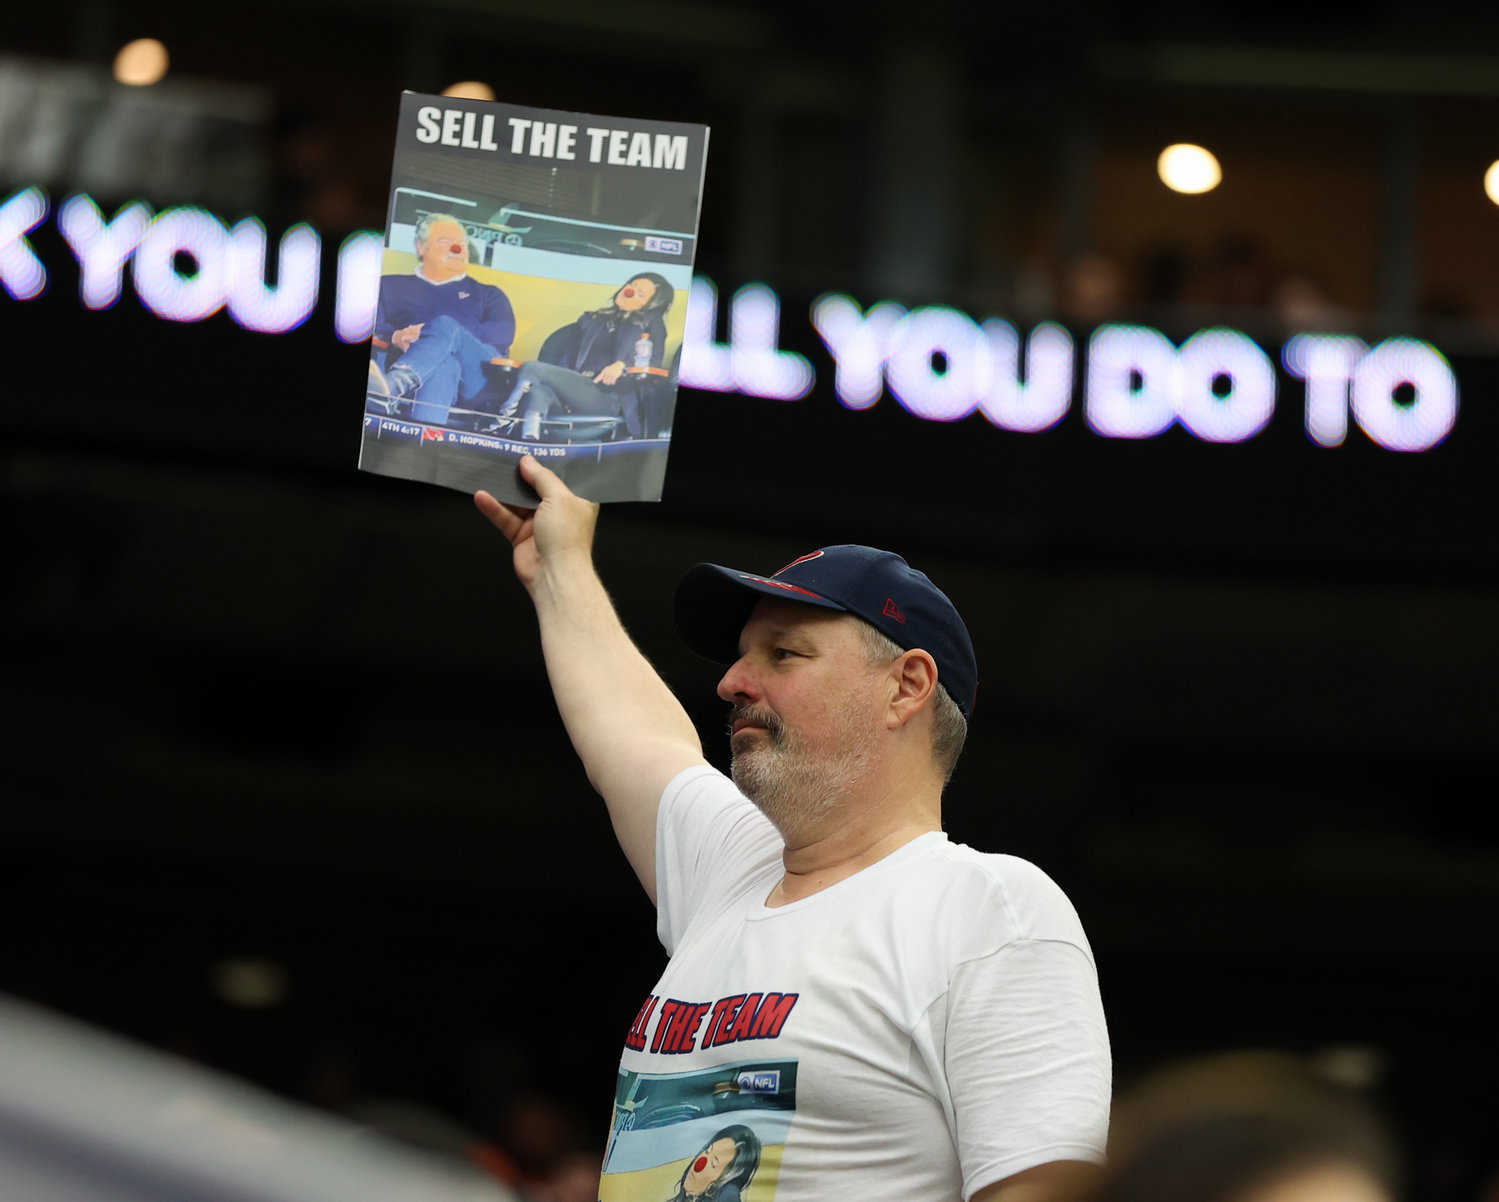 A Houston Texans fan holds up a sign saying “Sell the Team” with a photo of owner Cal McNair and wife Hannah during an NFL game between the Texans and the Titans on Jan. 9, 2022 in Houston, Texas. The Titans won, 28-25.